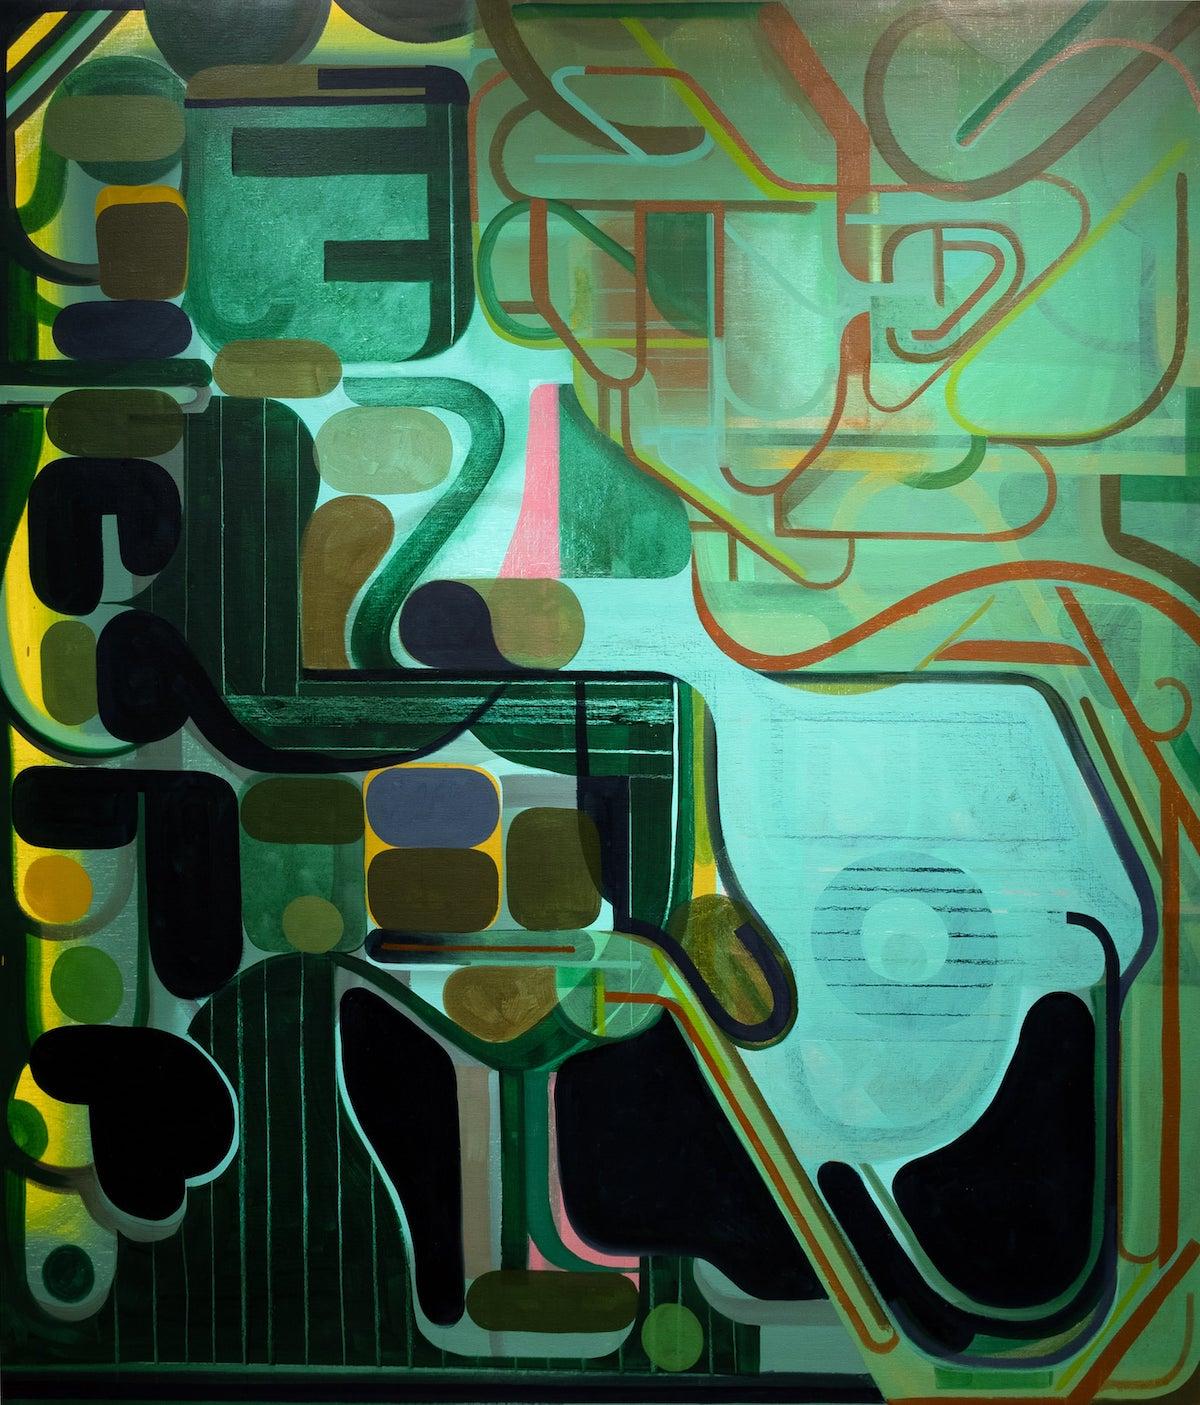 Tom Burckhardt, A Pointed, 2023. Oil on linen, 64 by 55 inches